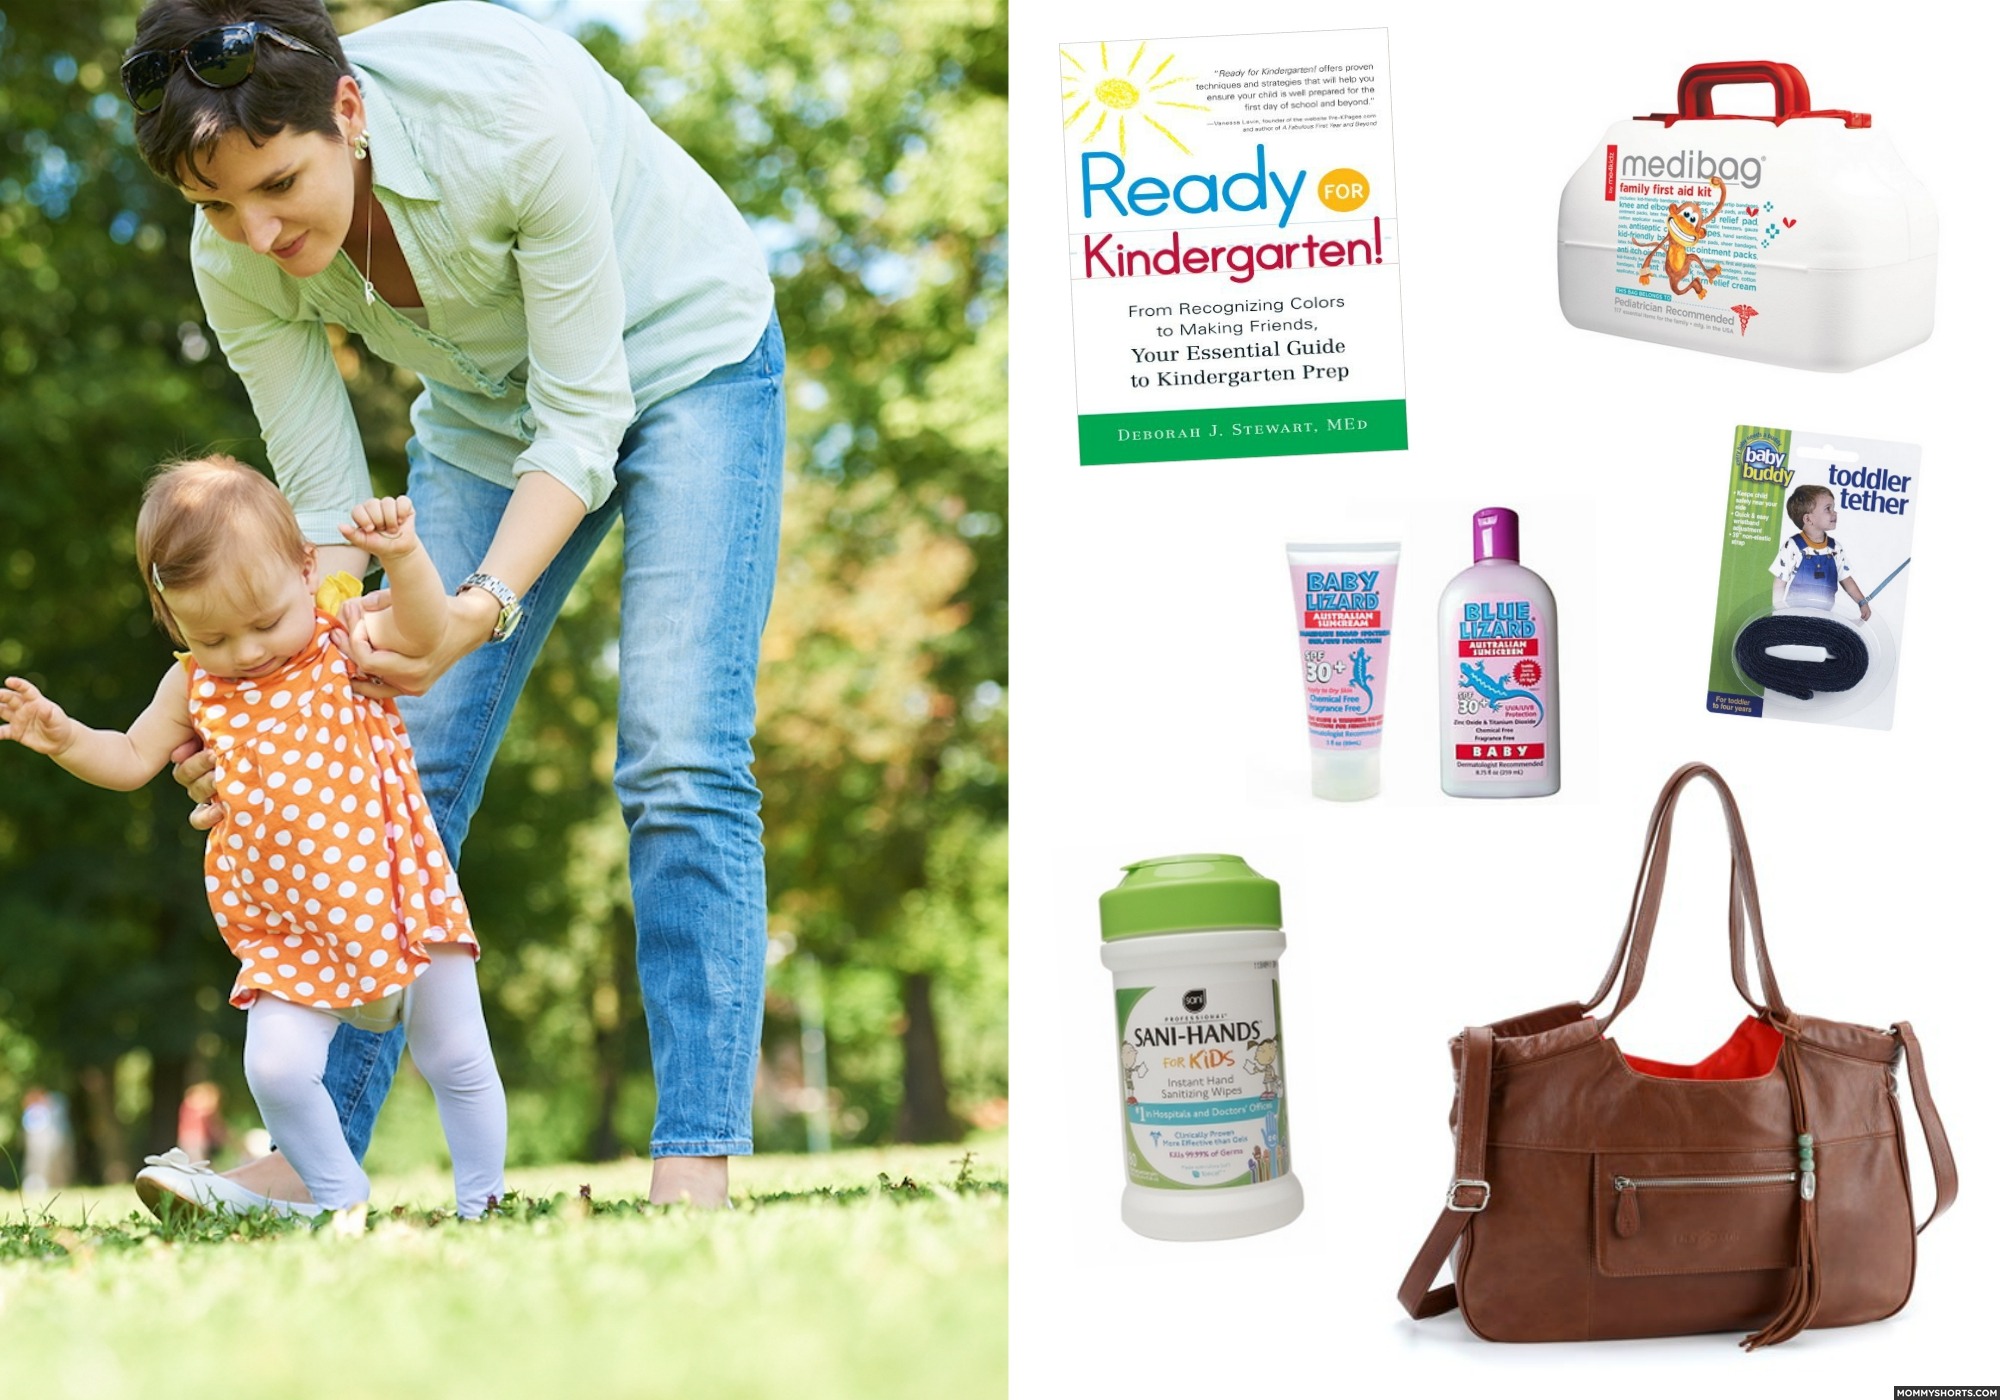 What do the contents of your diaper bag say about your parenting style?